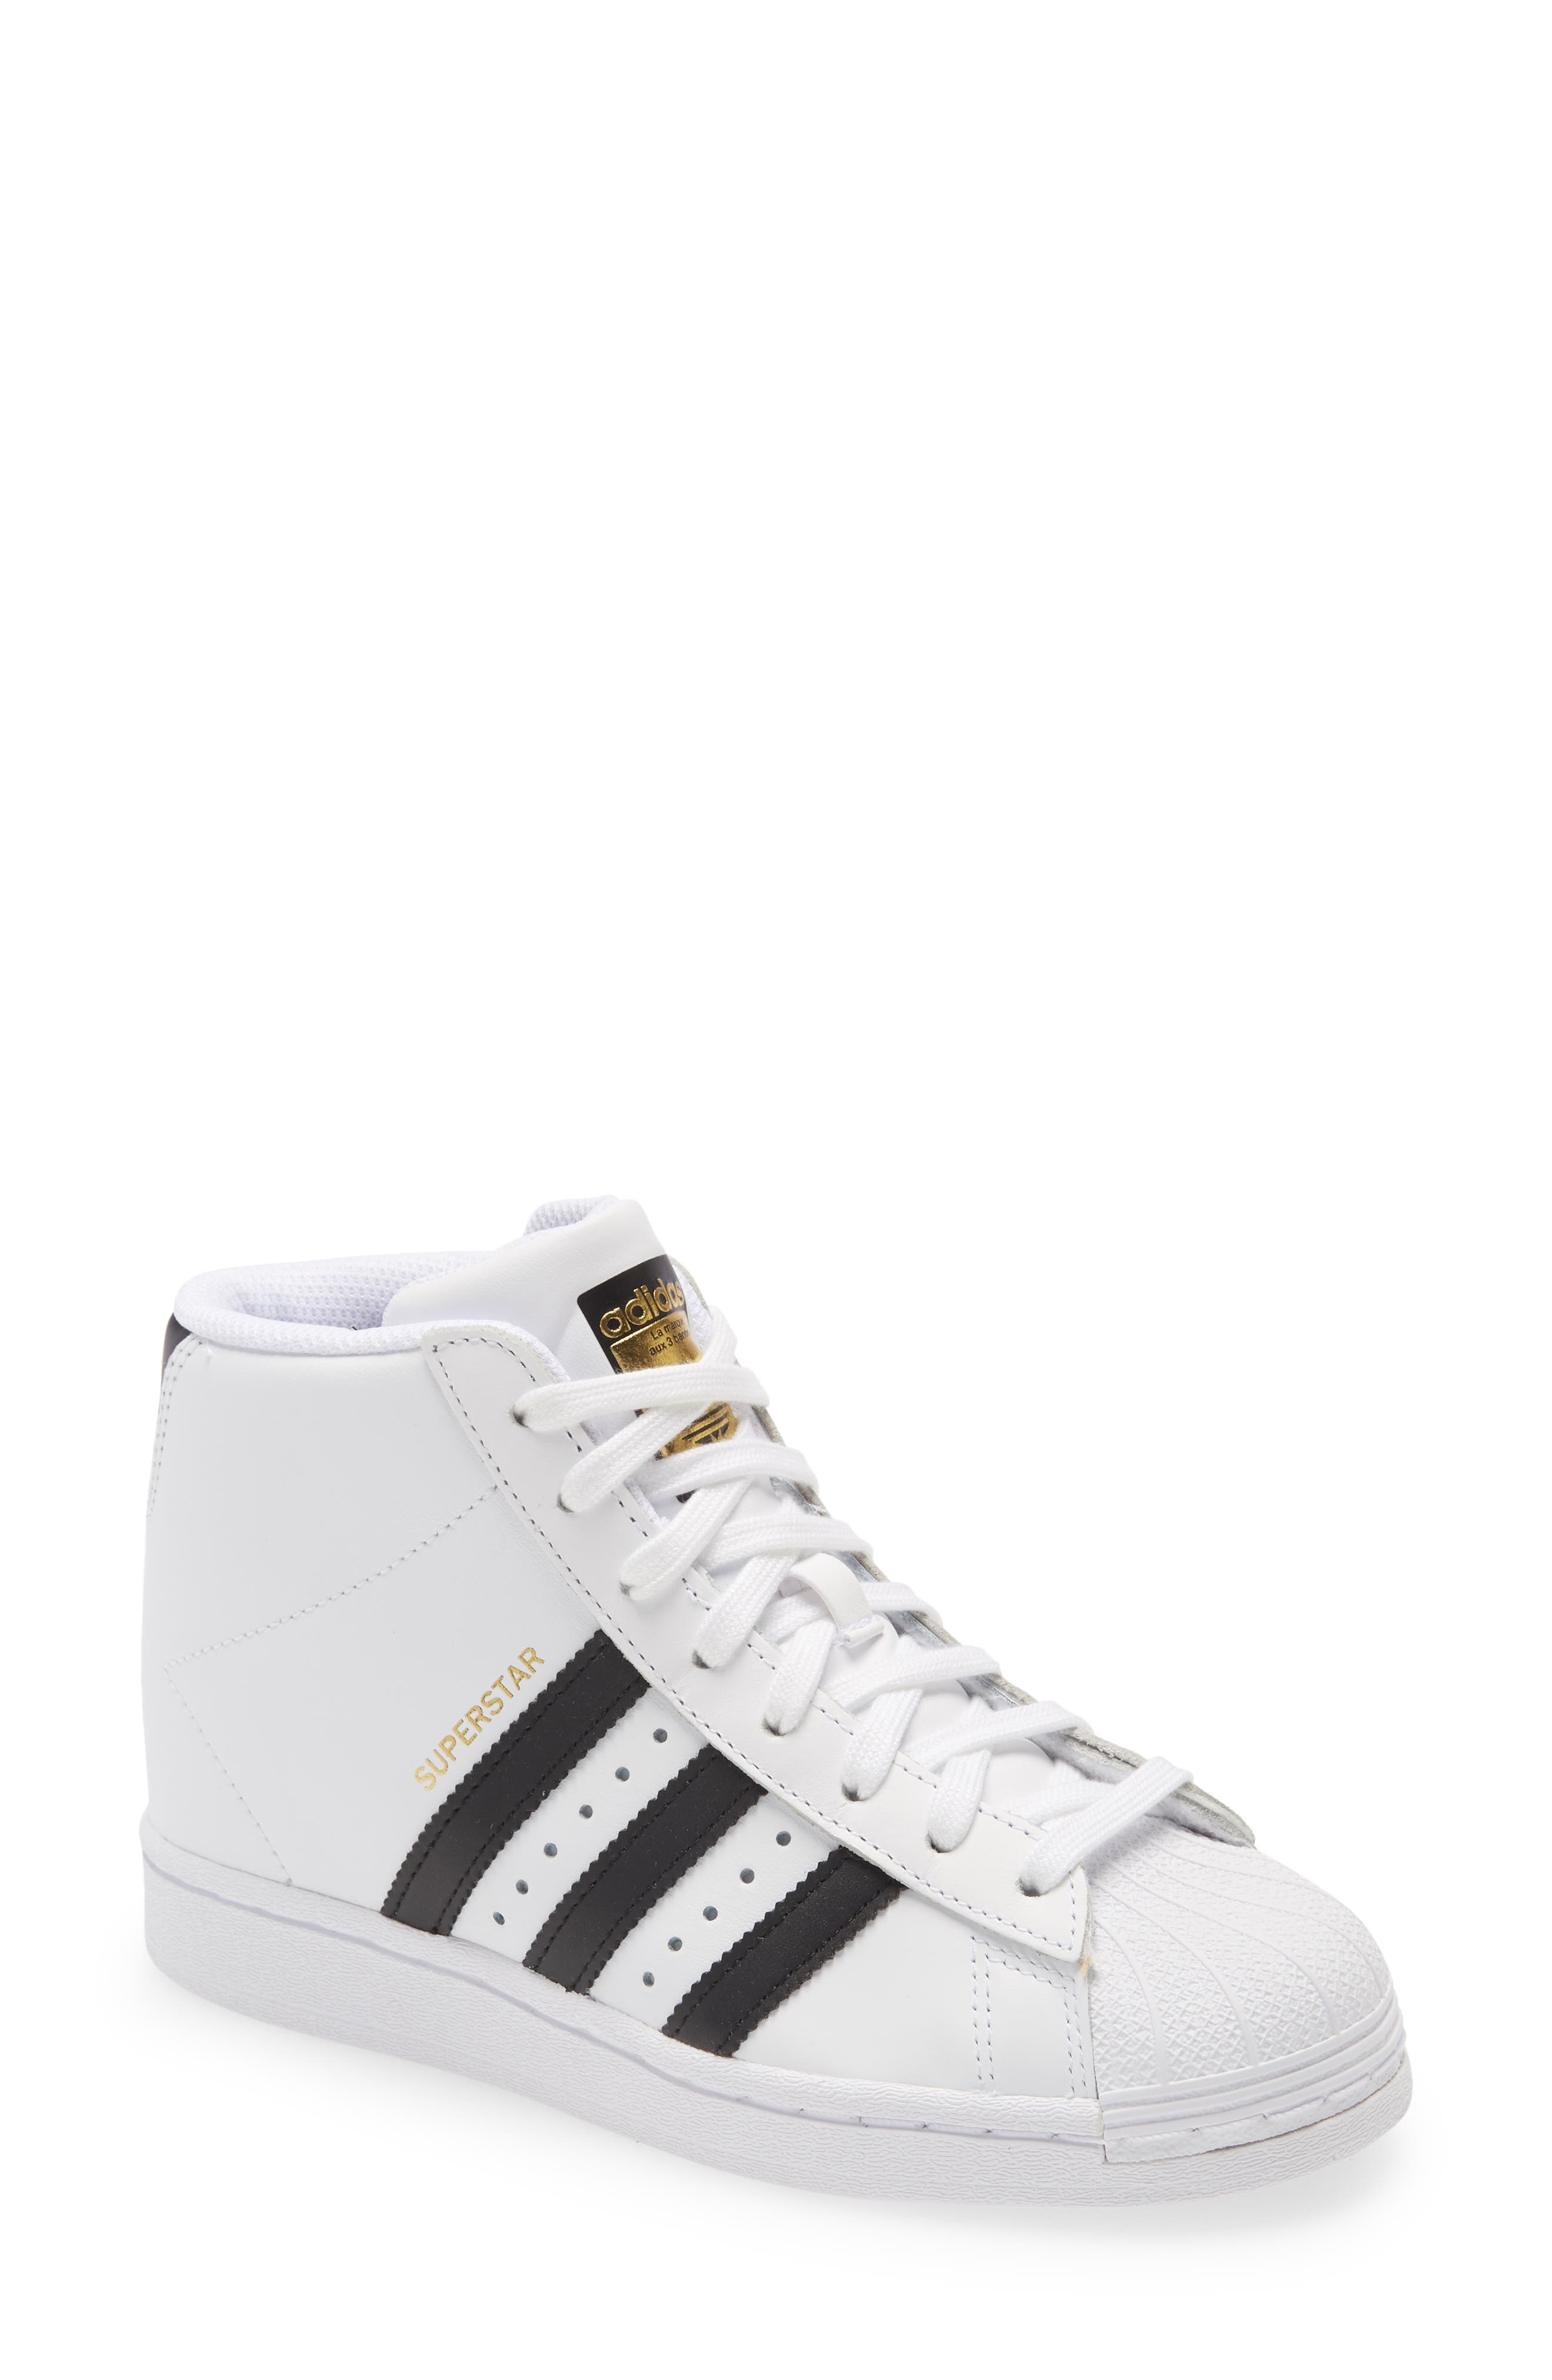 nordstrom womens adidas shoes